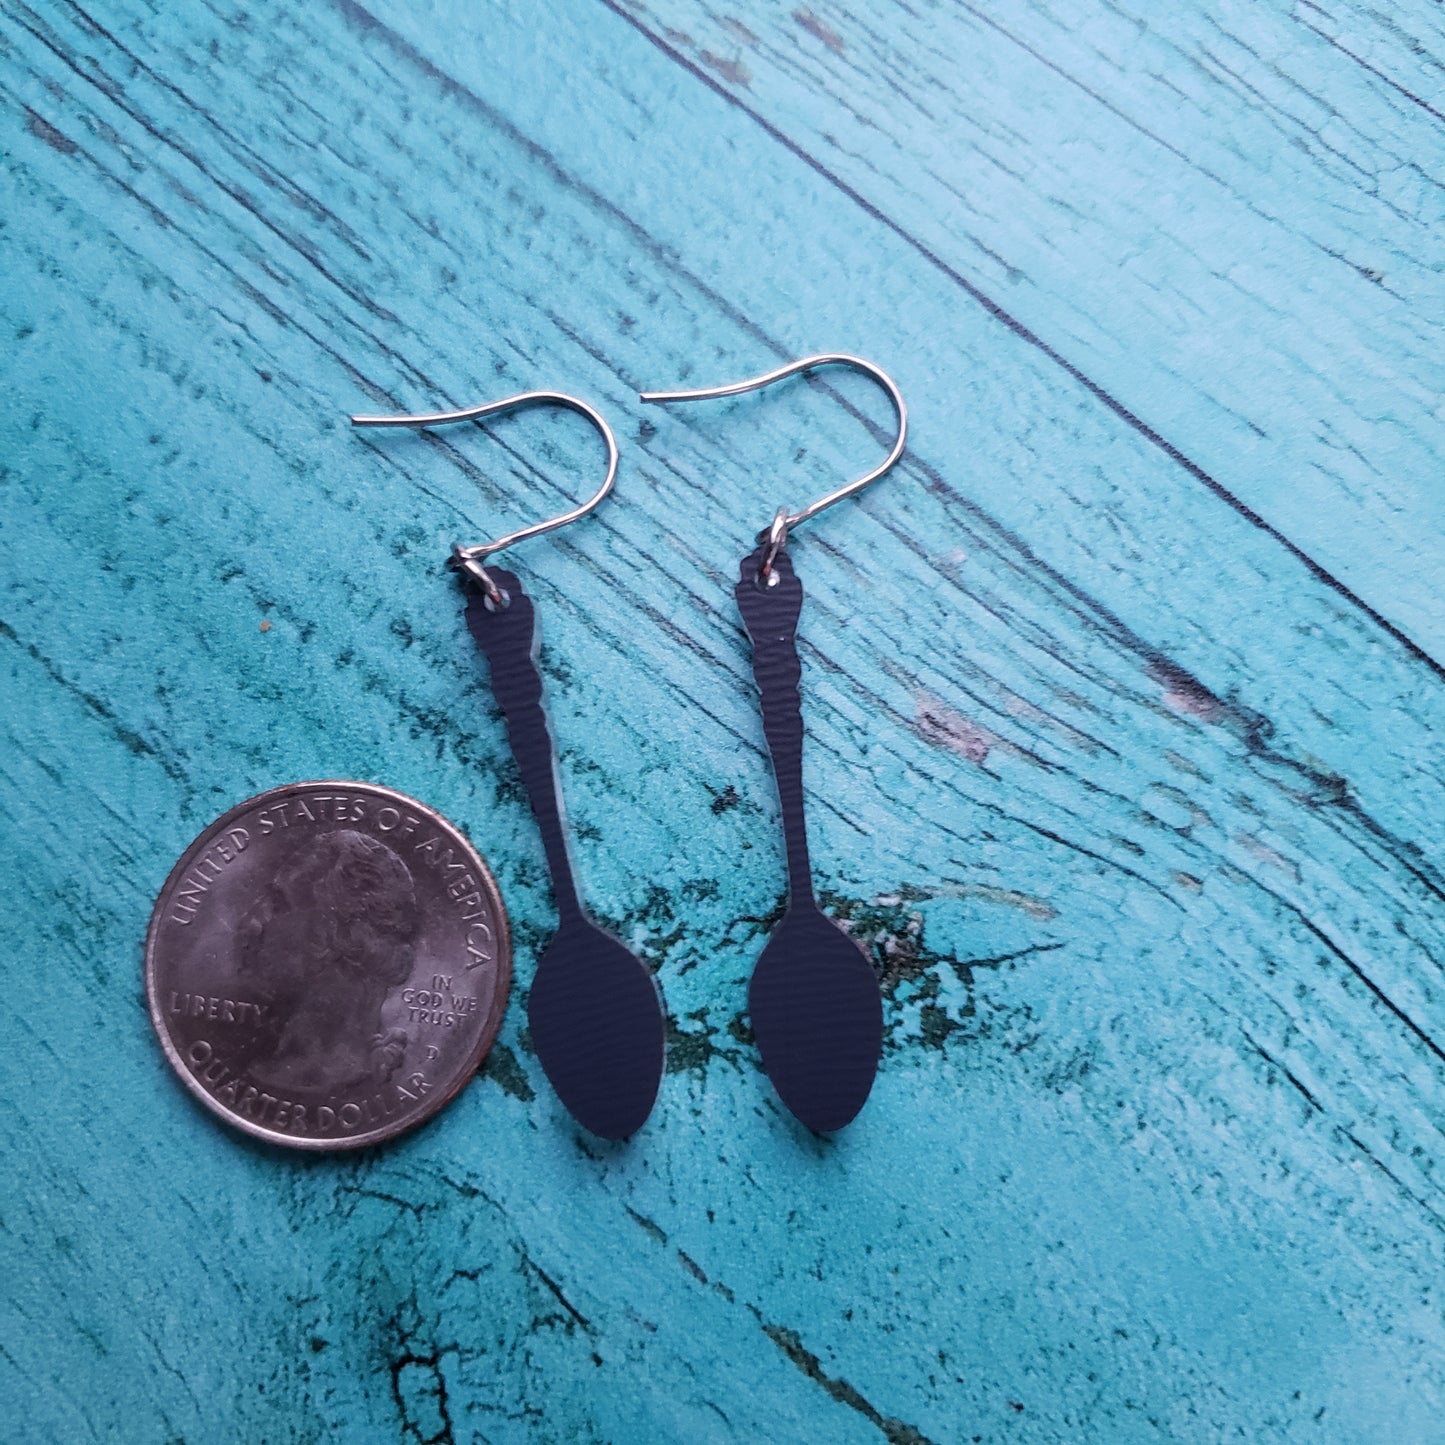 Backside of silver spoon earrings next to quarter for size.